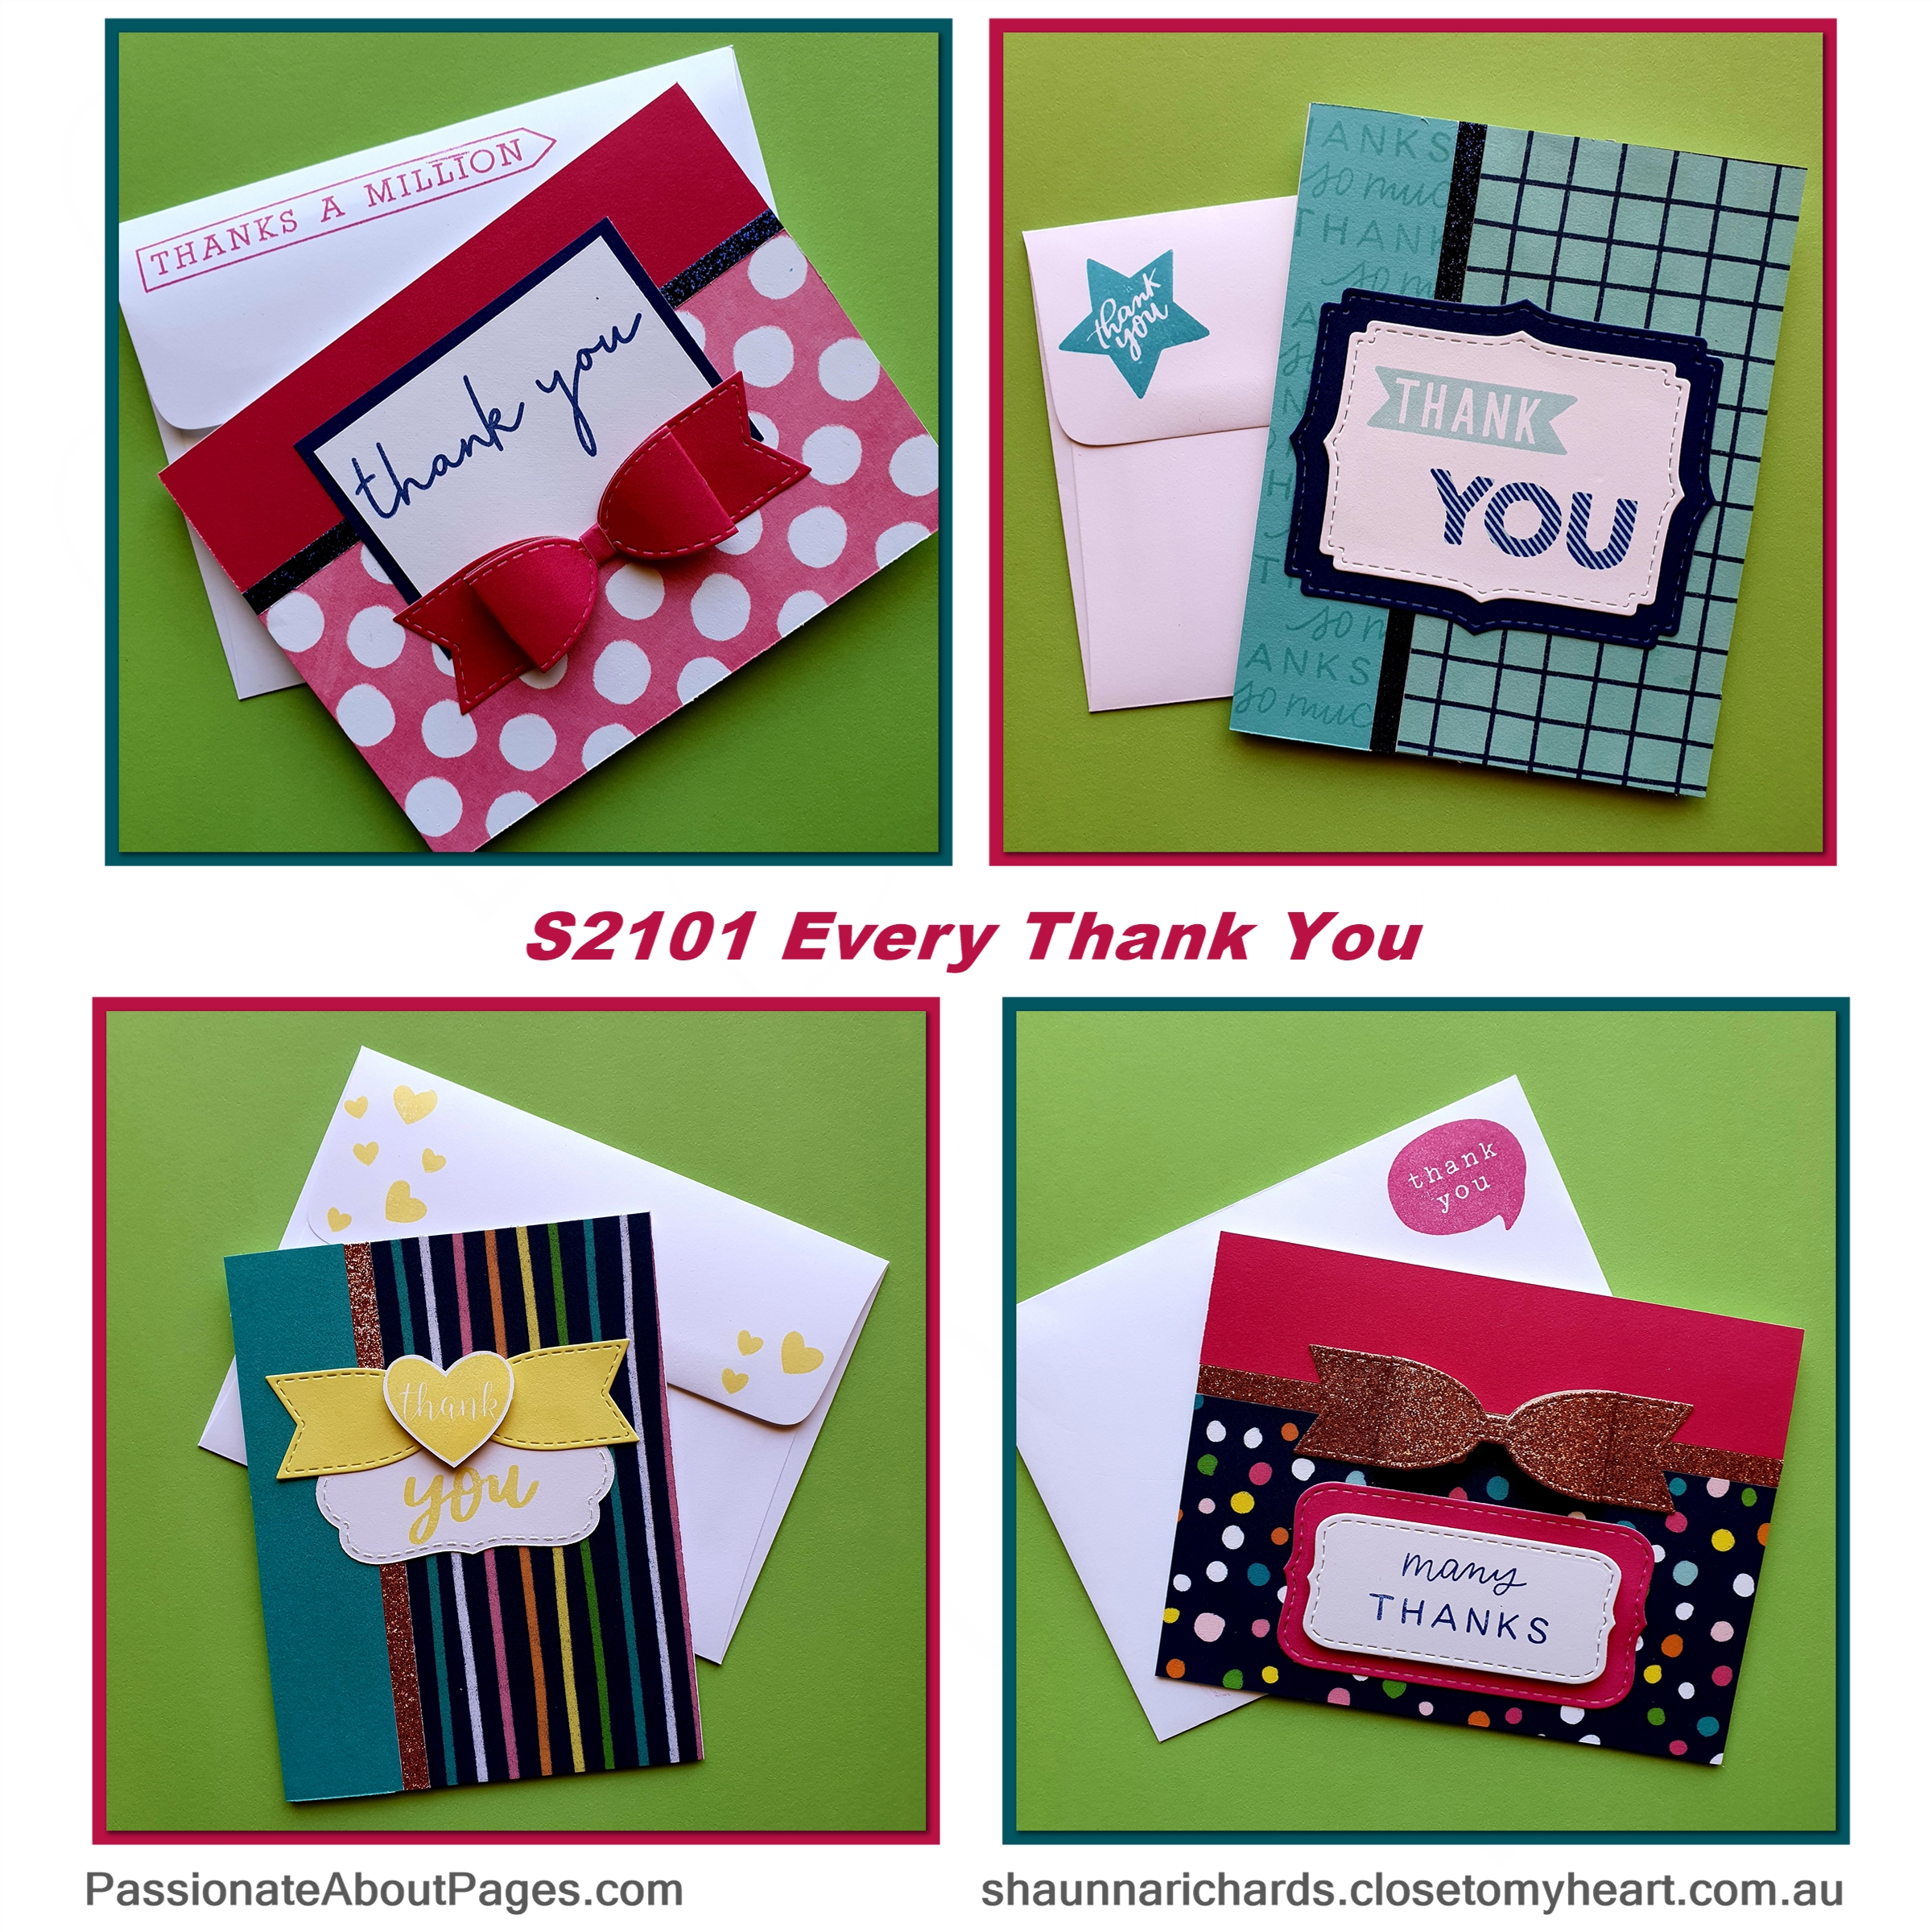 Create pages and cards with Every Thank you (S2101) – January 2021's Stamp of the Month from Close To My Heart. Order yours from https://shaunnarichards.closetomyheart.com.au/ during January 2021 only